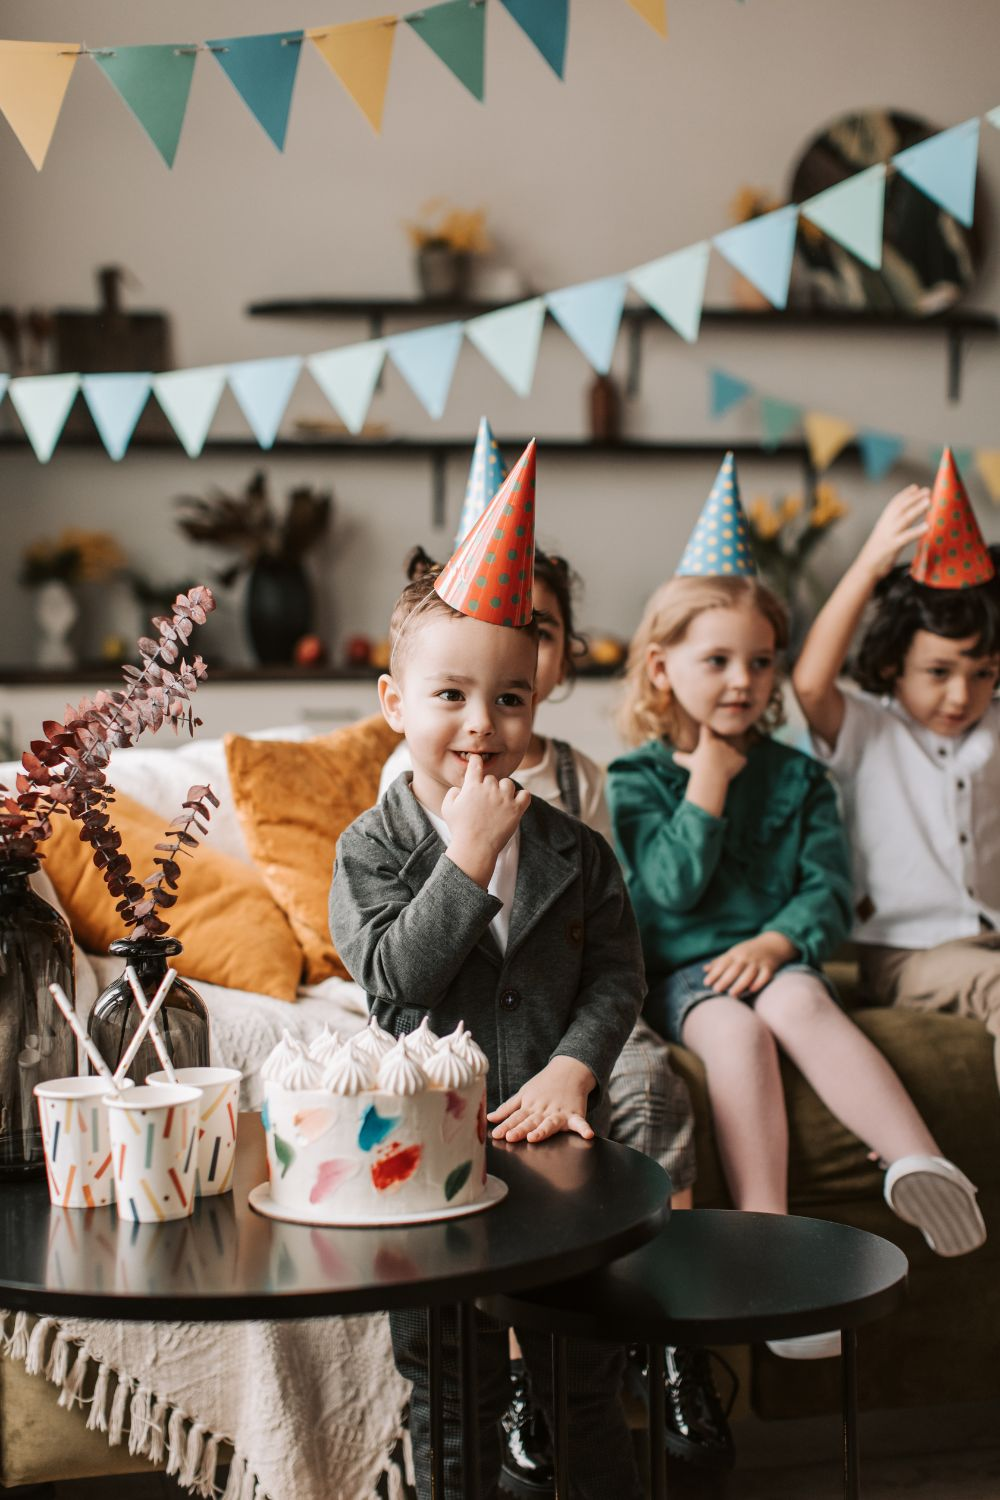 Kids at a birthday party - Featured In Fun Birthday Party Game Article